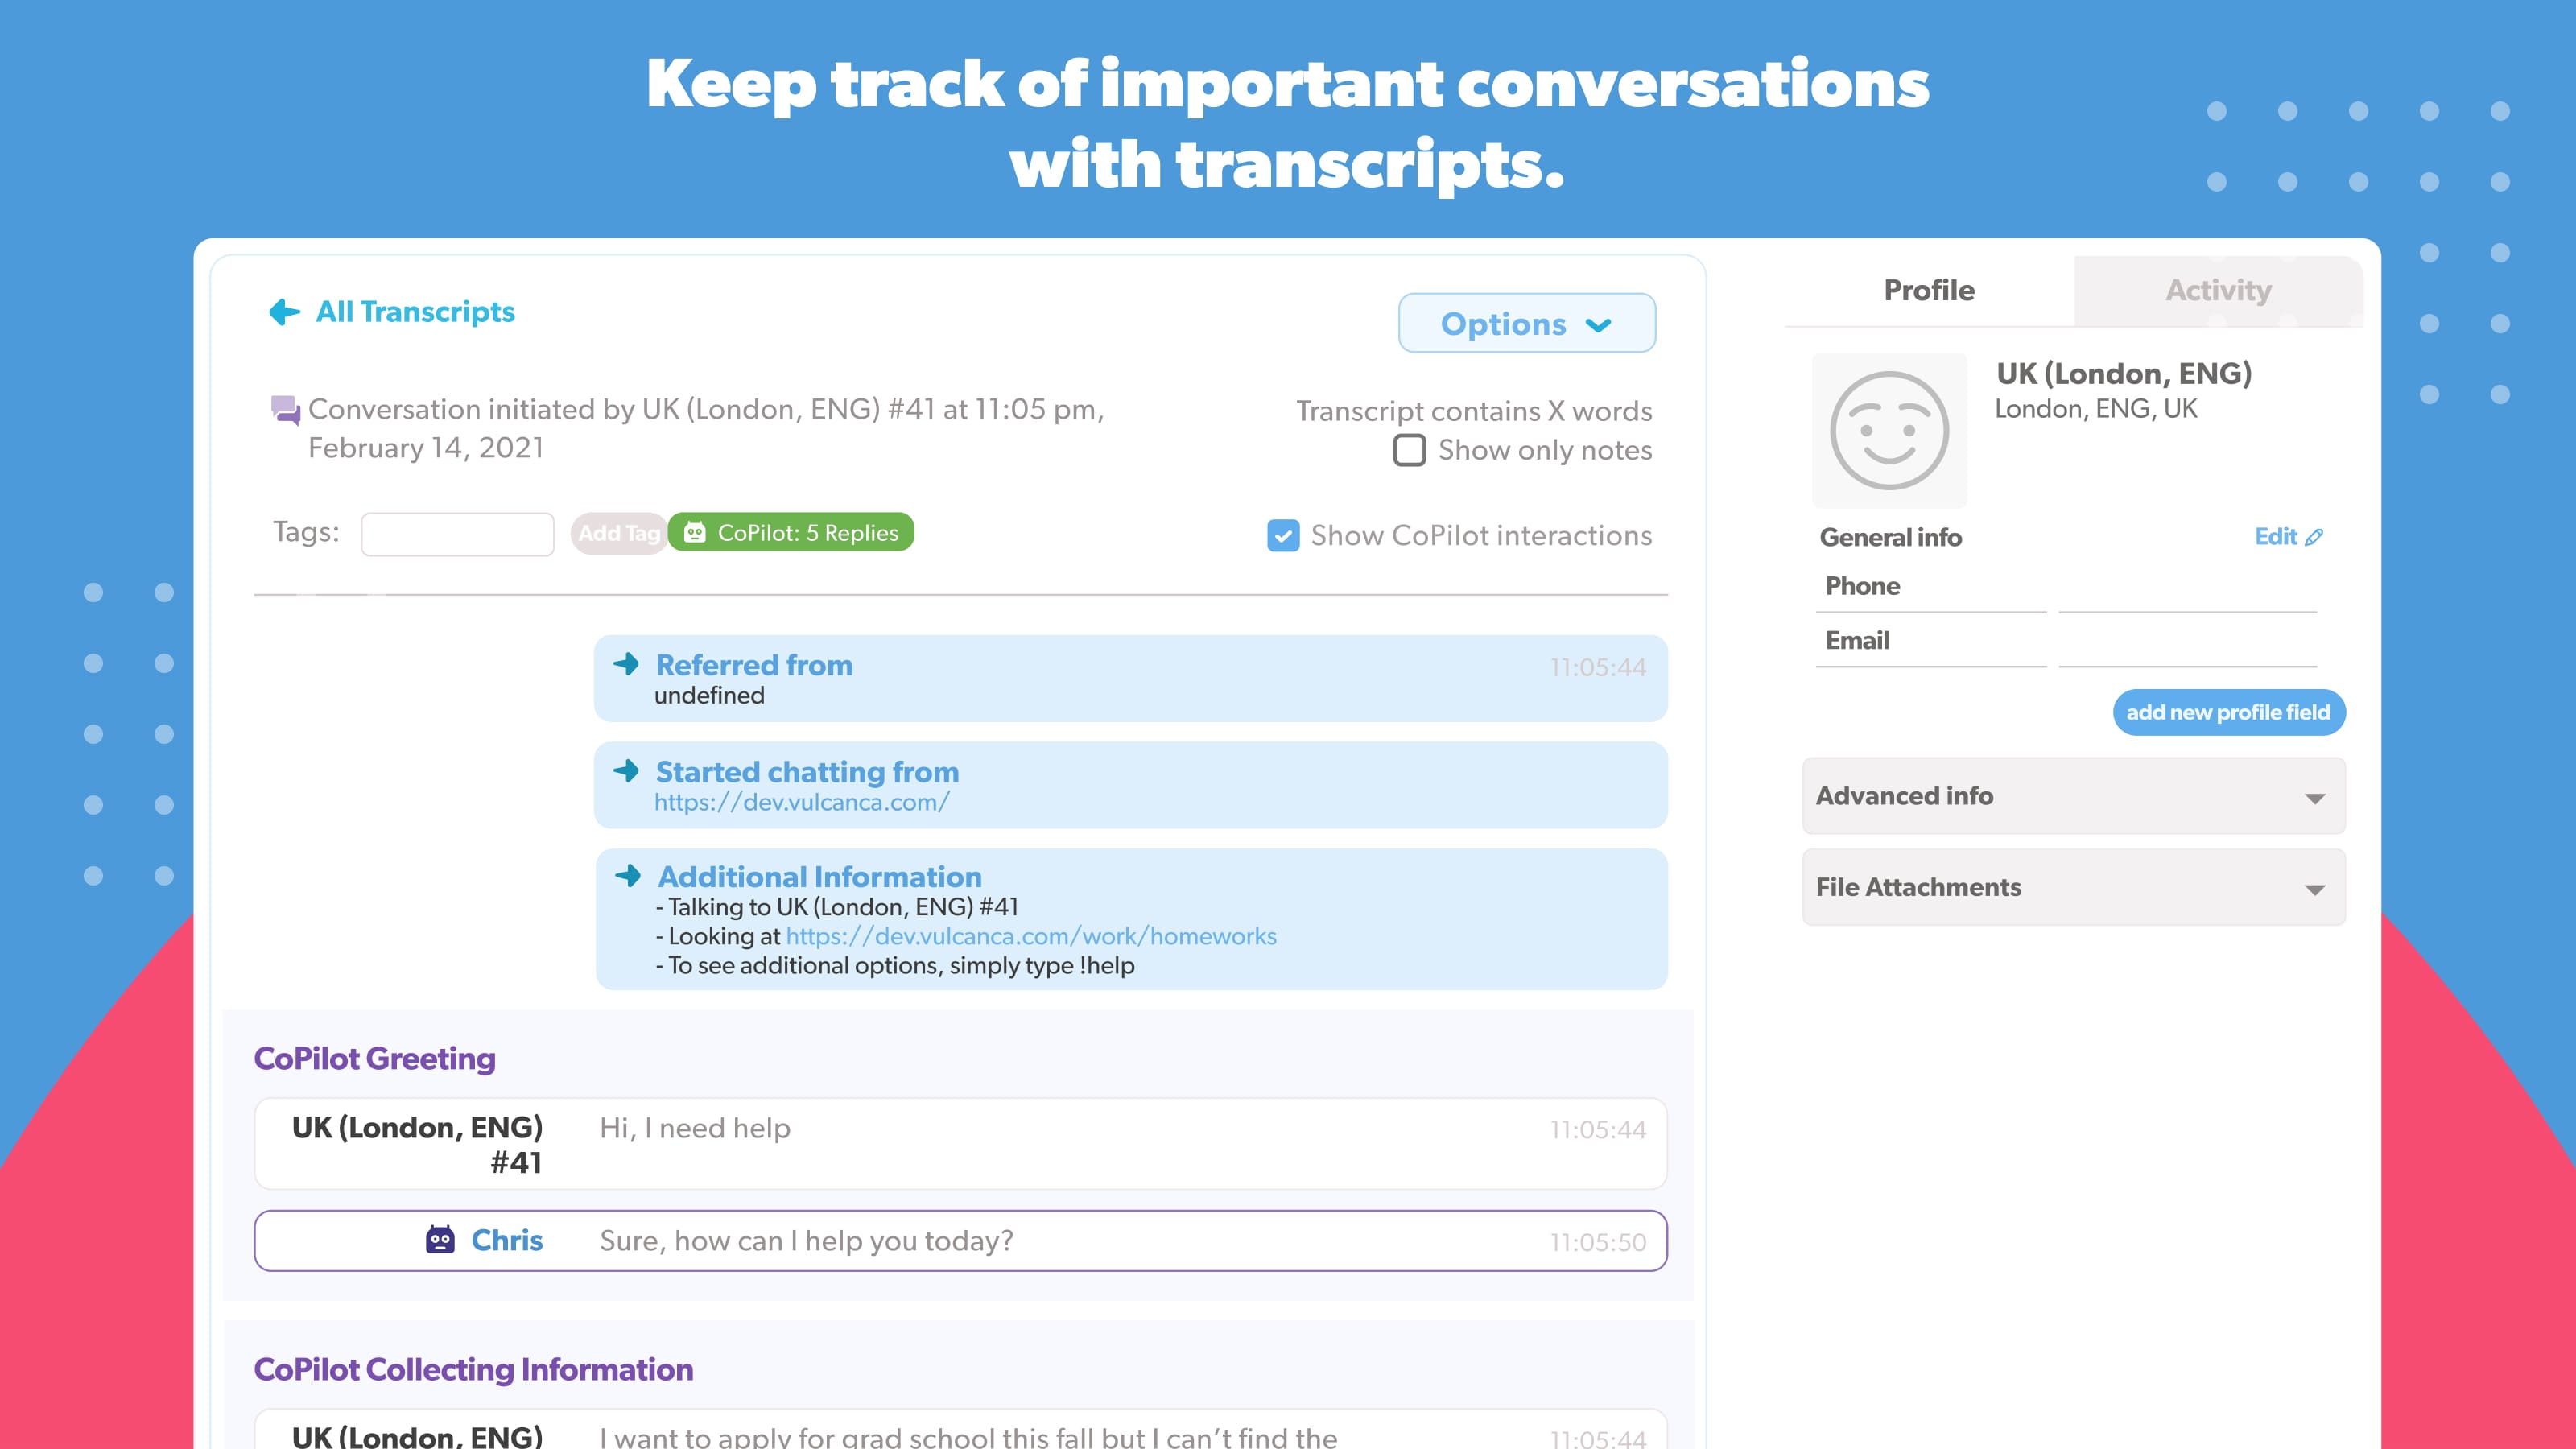 Keep track of important conversations with transcripts.